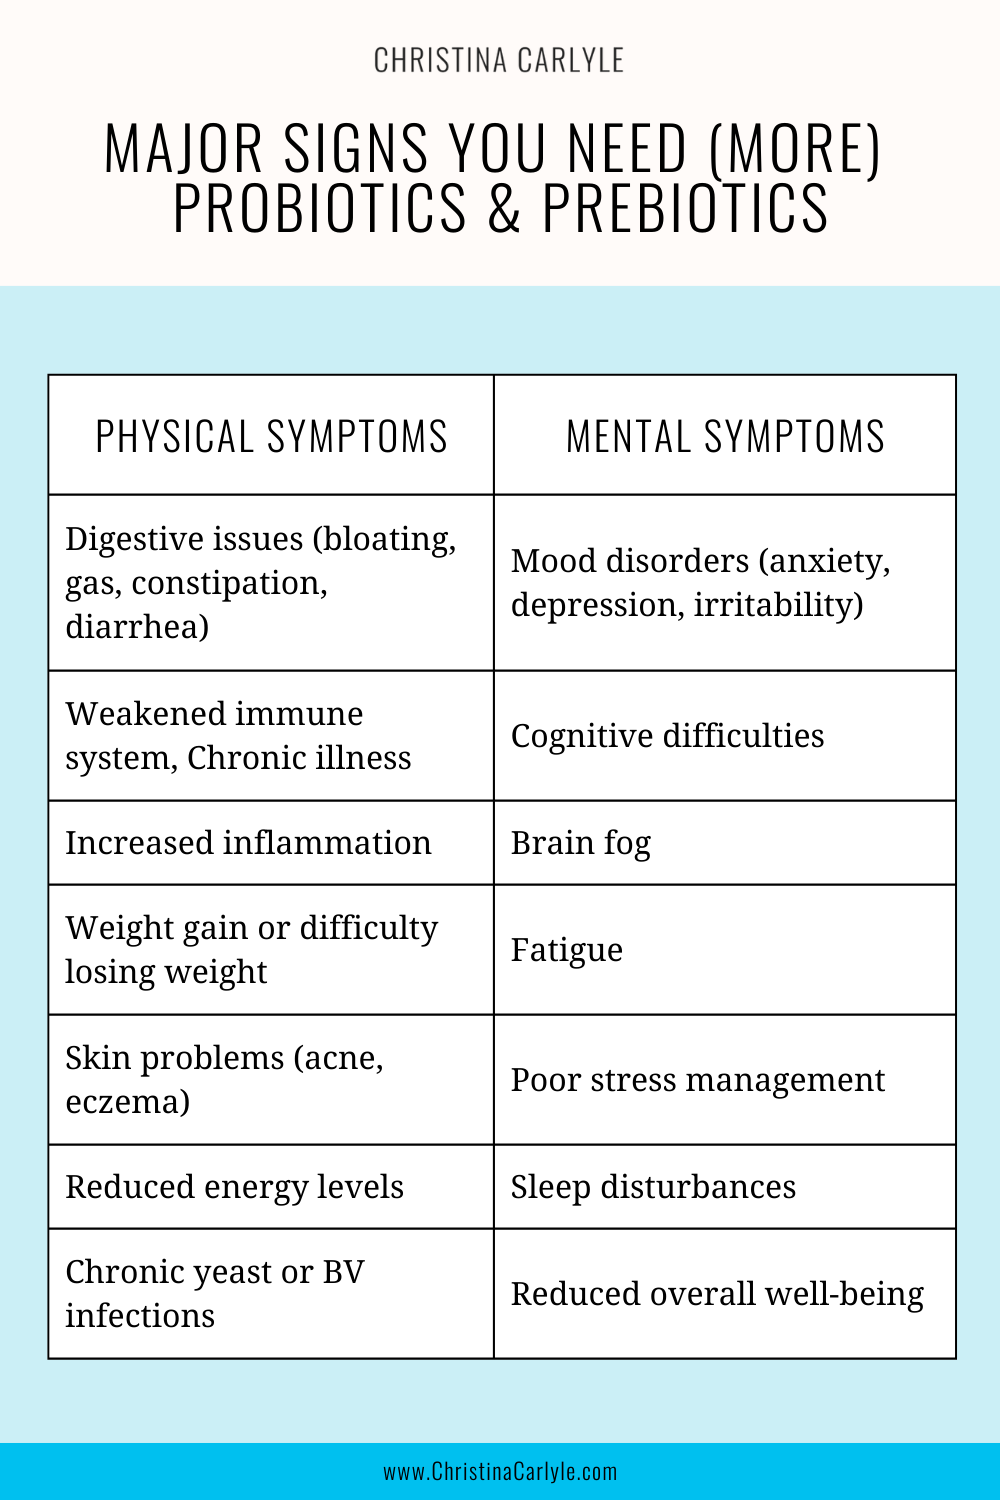 a chart of physical and mental symptoms of not getting enough probiotics